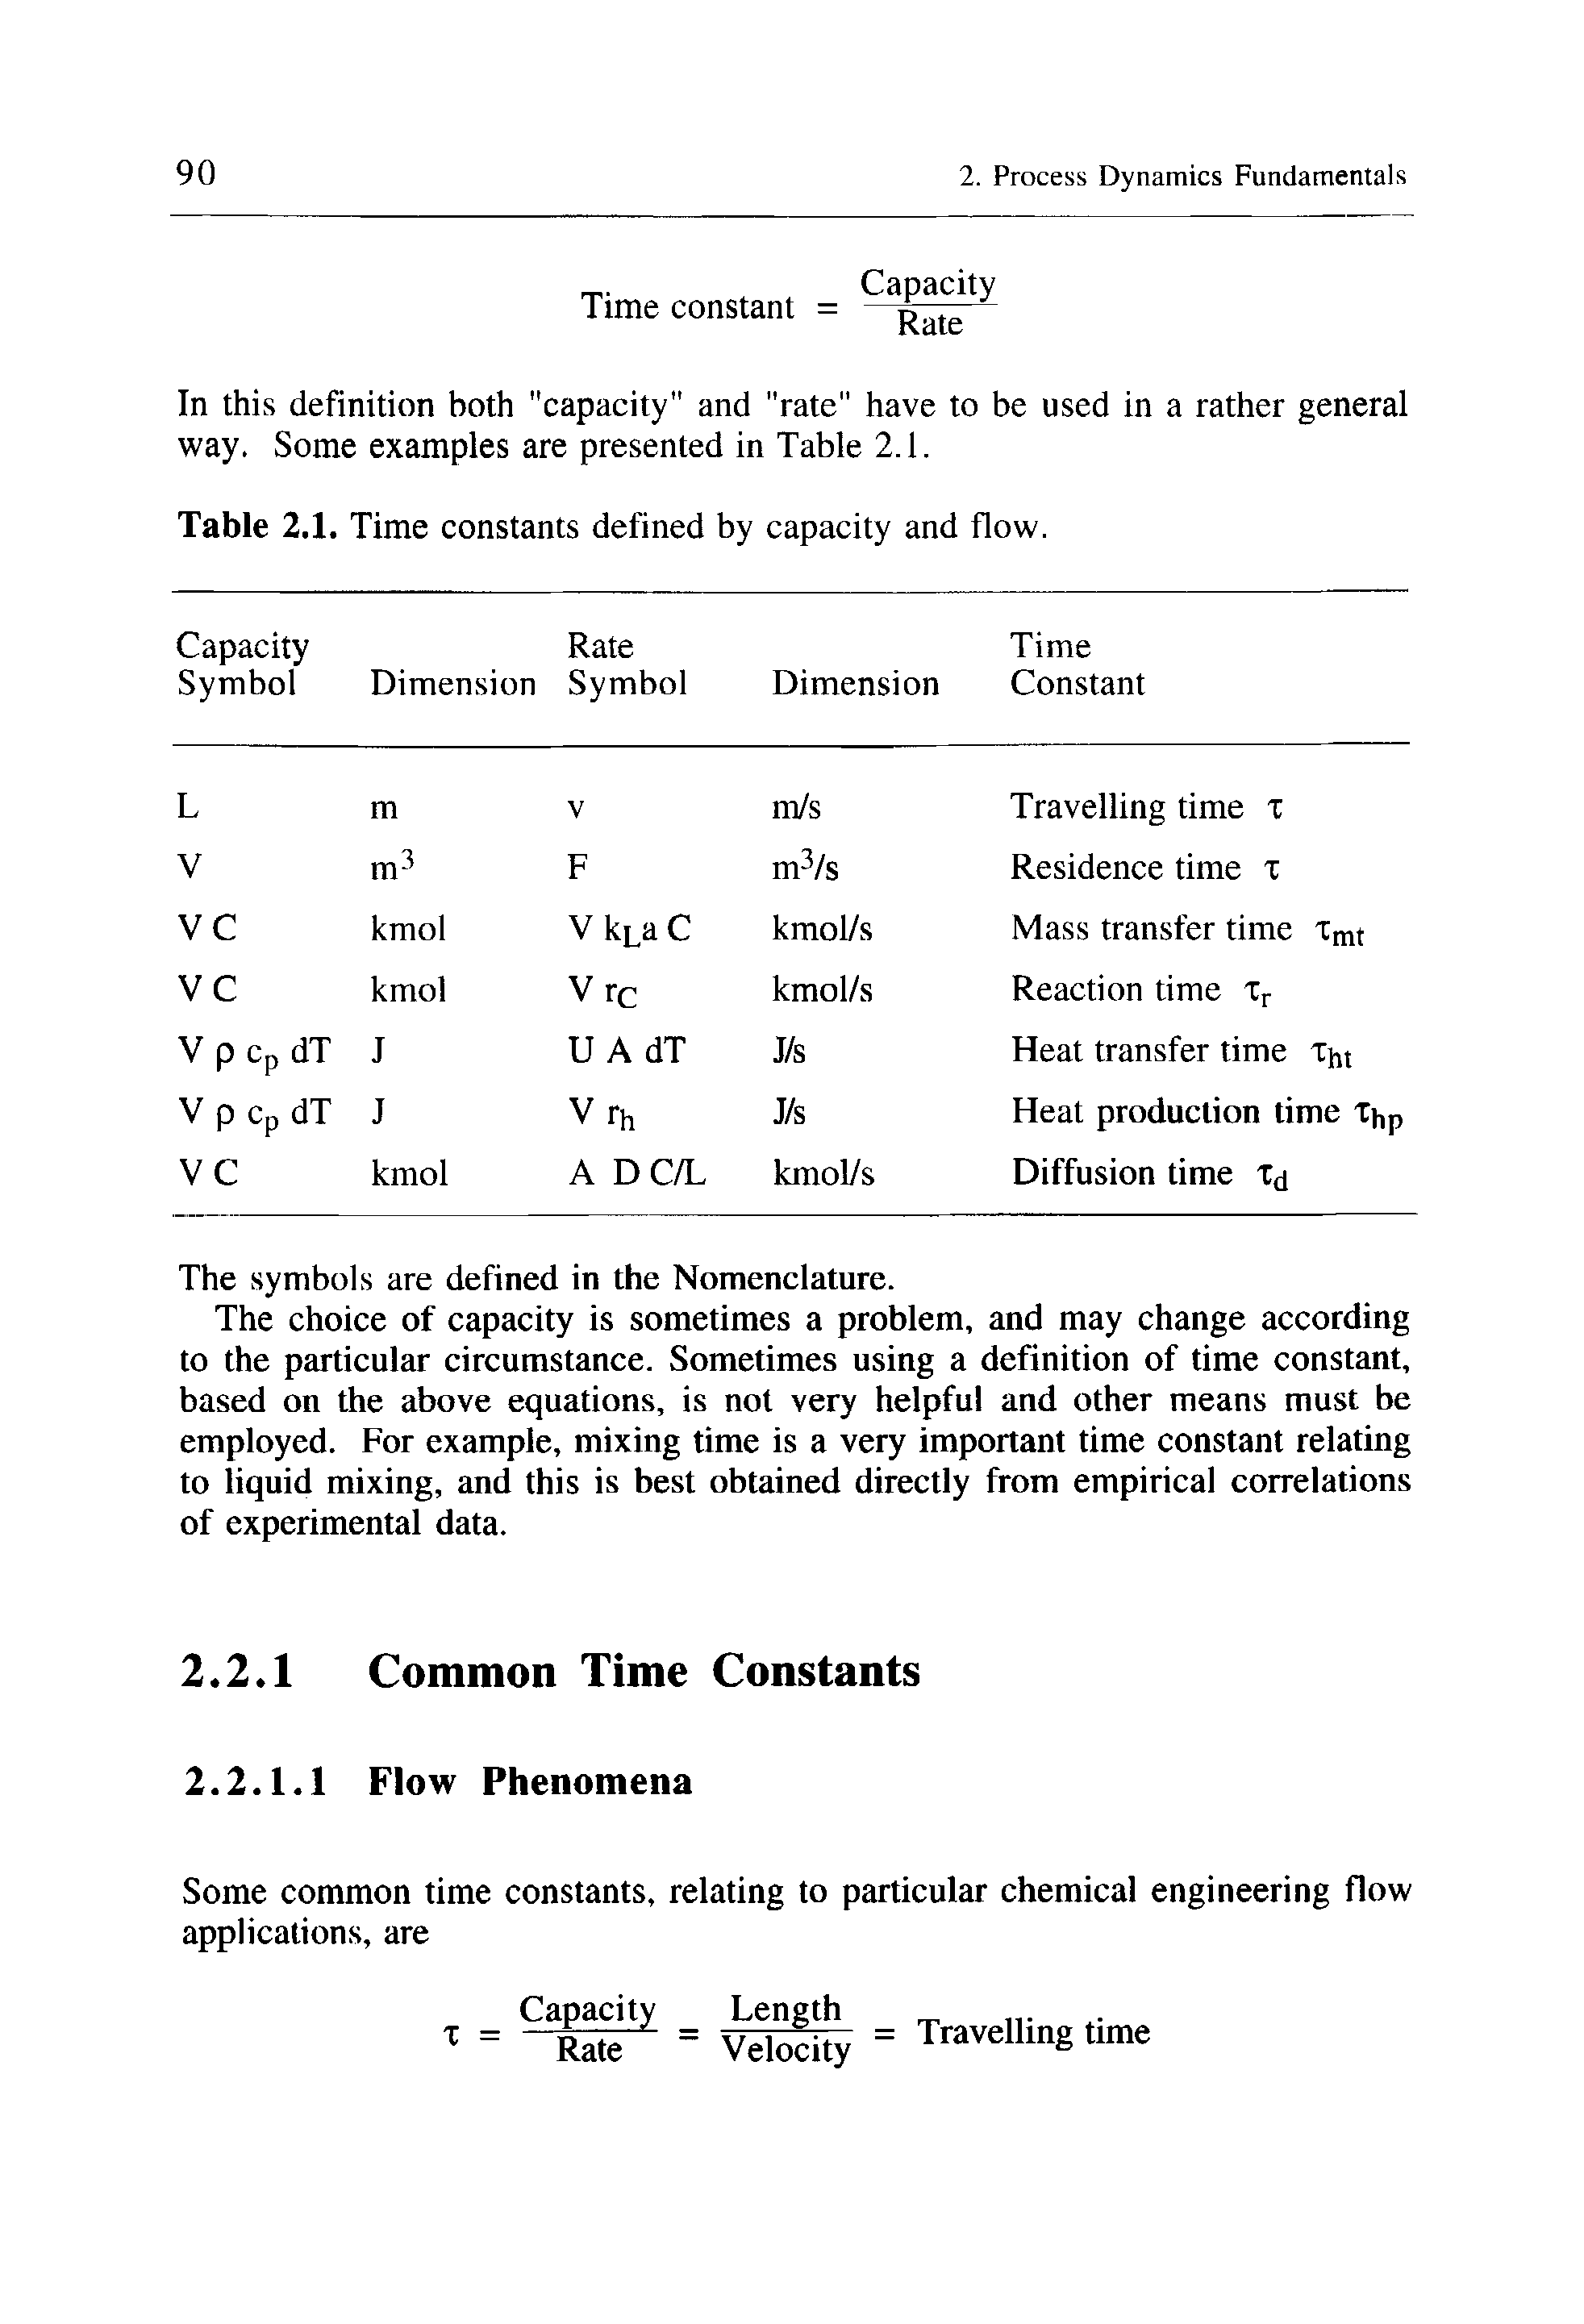 Table 2.1. Time constants defined by capacity and flow.